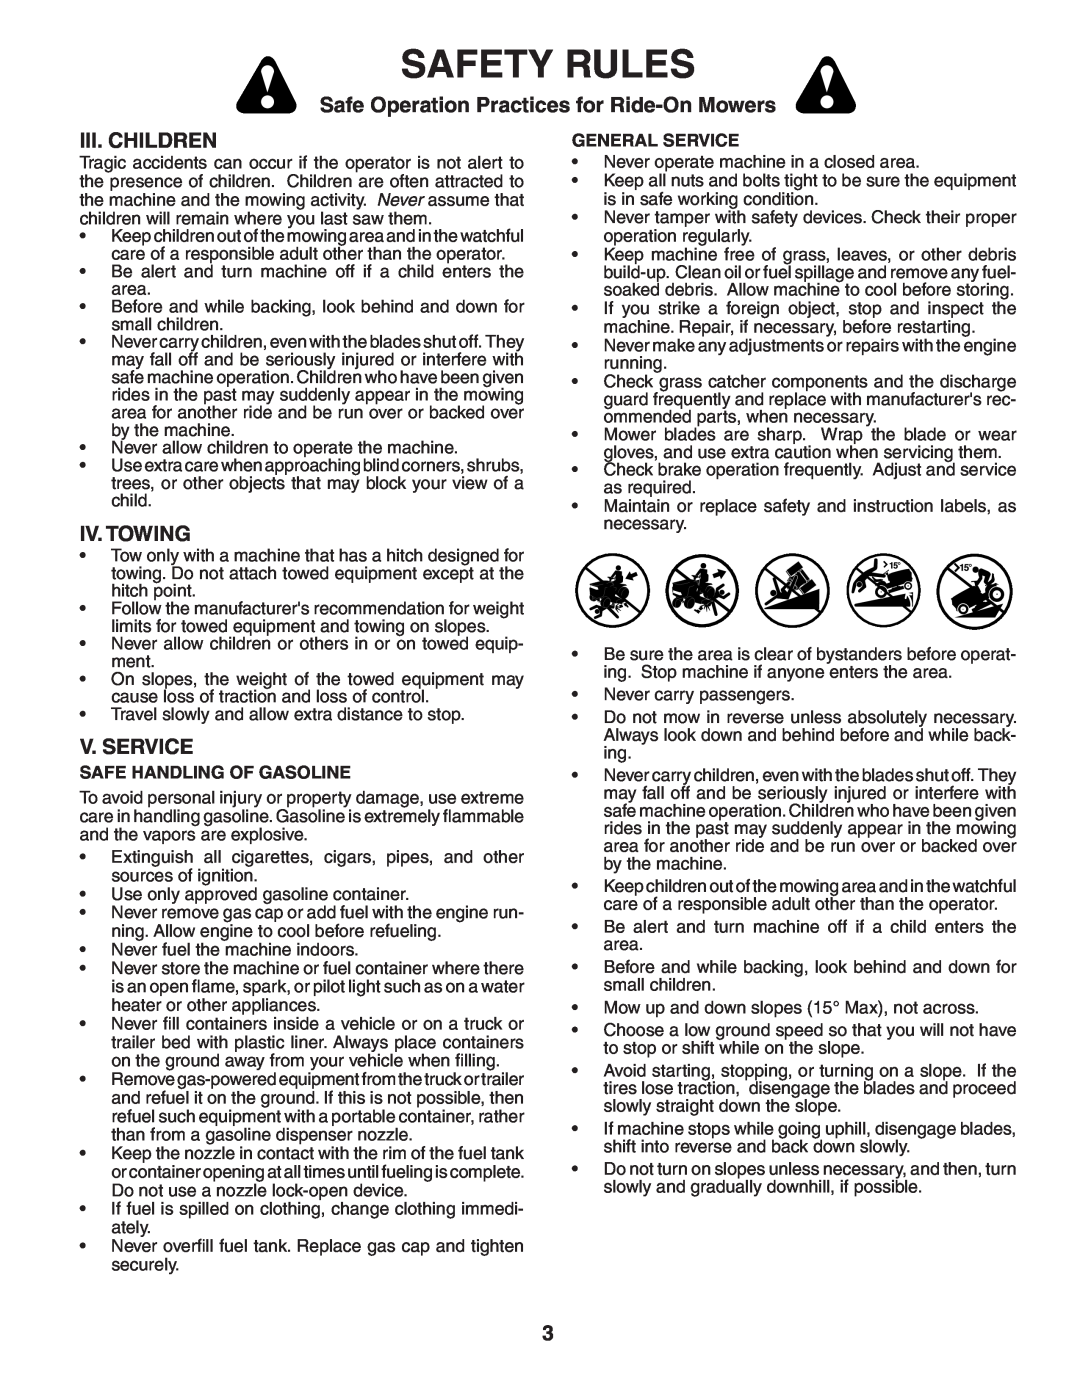 Poulan PBGT22H54 manual Iii. Children, Iv. Towing, V. Service, Safety Rules, Safe Operation Practices for Ride-On Mowers 